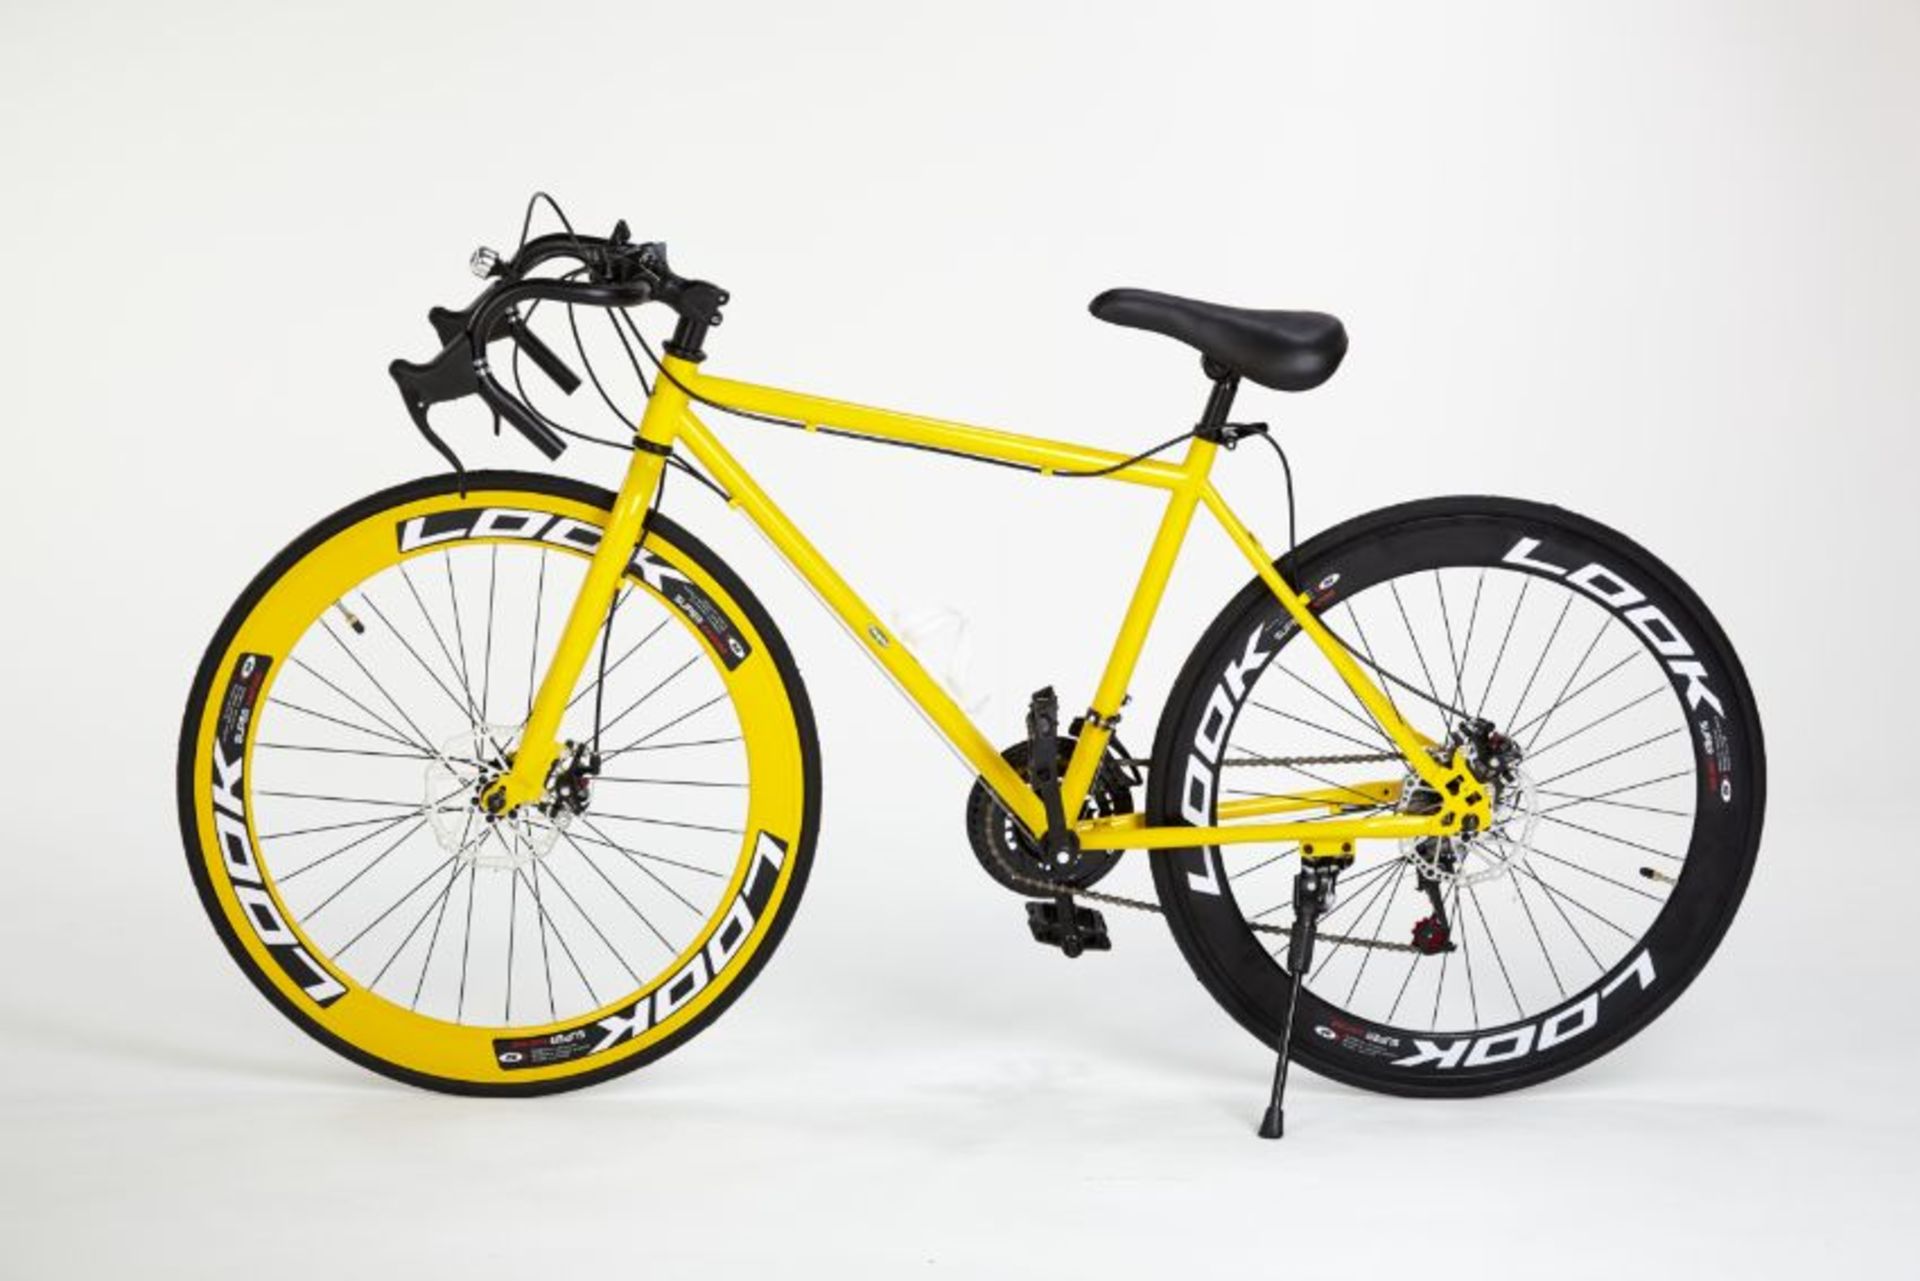 YELLOW STREET BIKE WITH 21 GREAR, BRAKE DISKS, KICK STAND, COOL THIN TYRES - Image 7 of 12